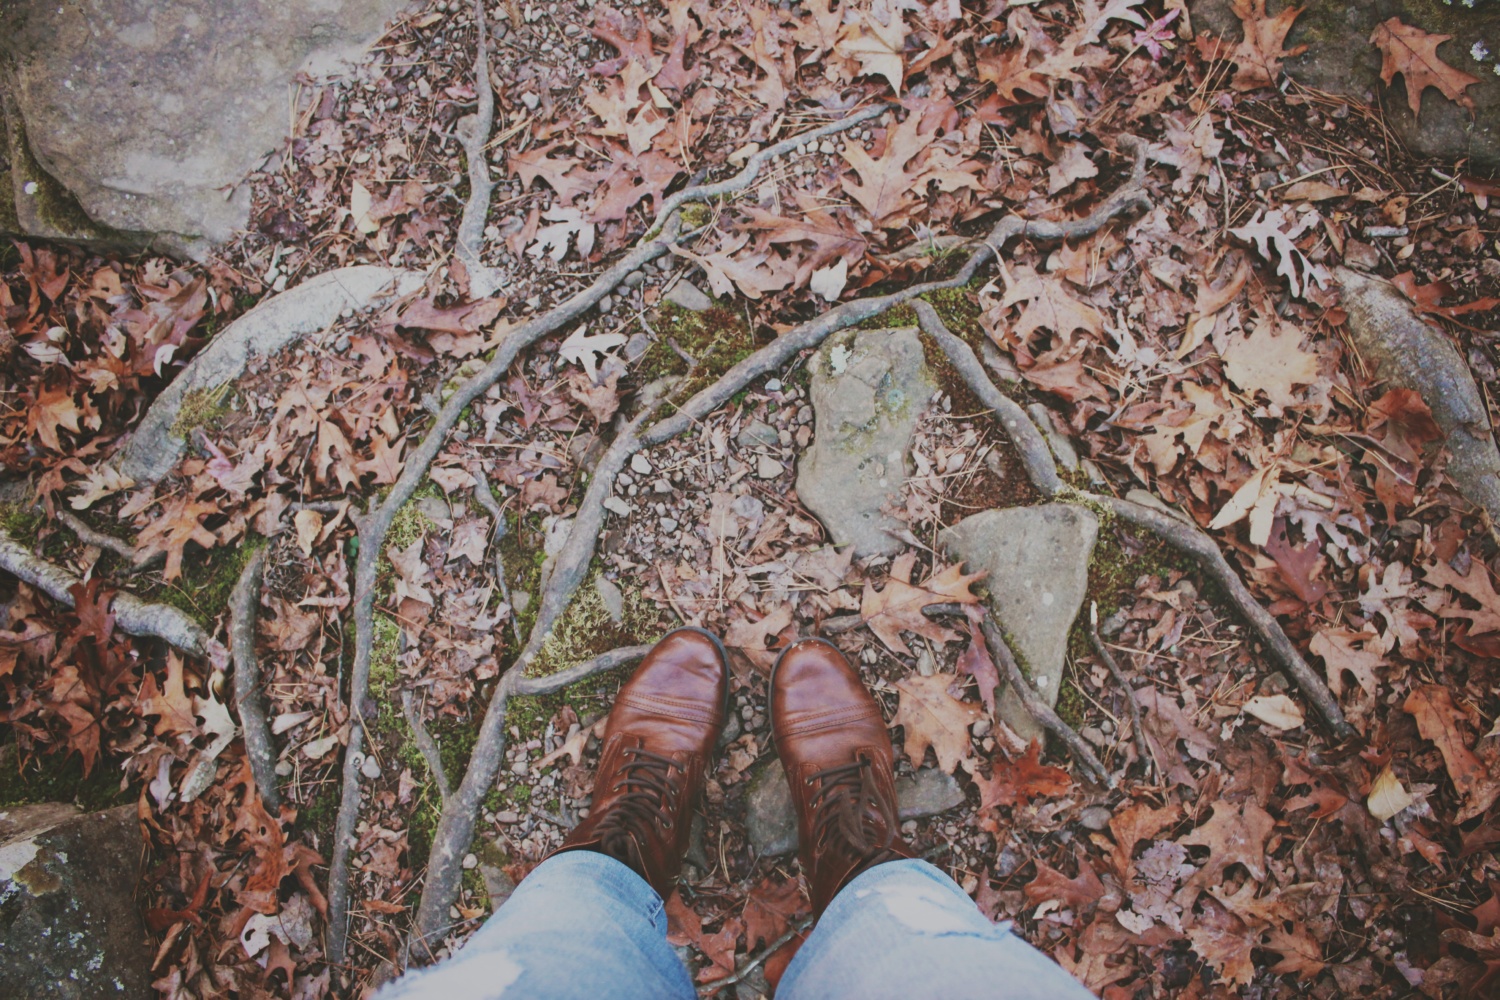 Looking down at boots while standing in forest covered with autumn leaves